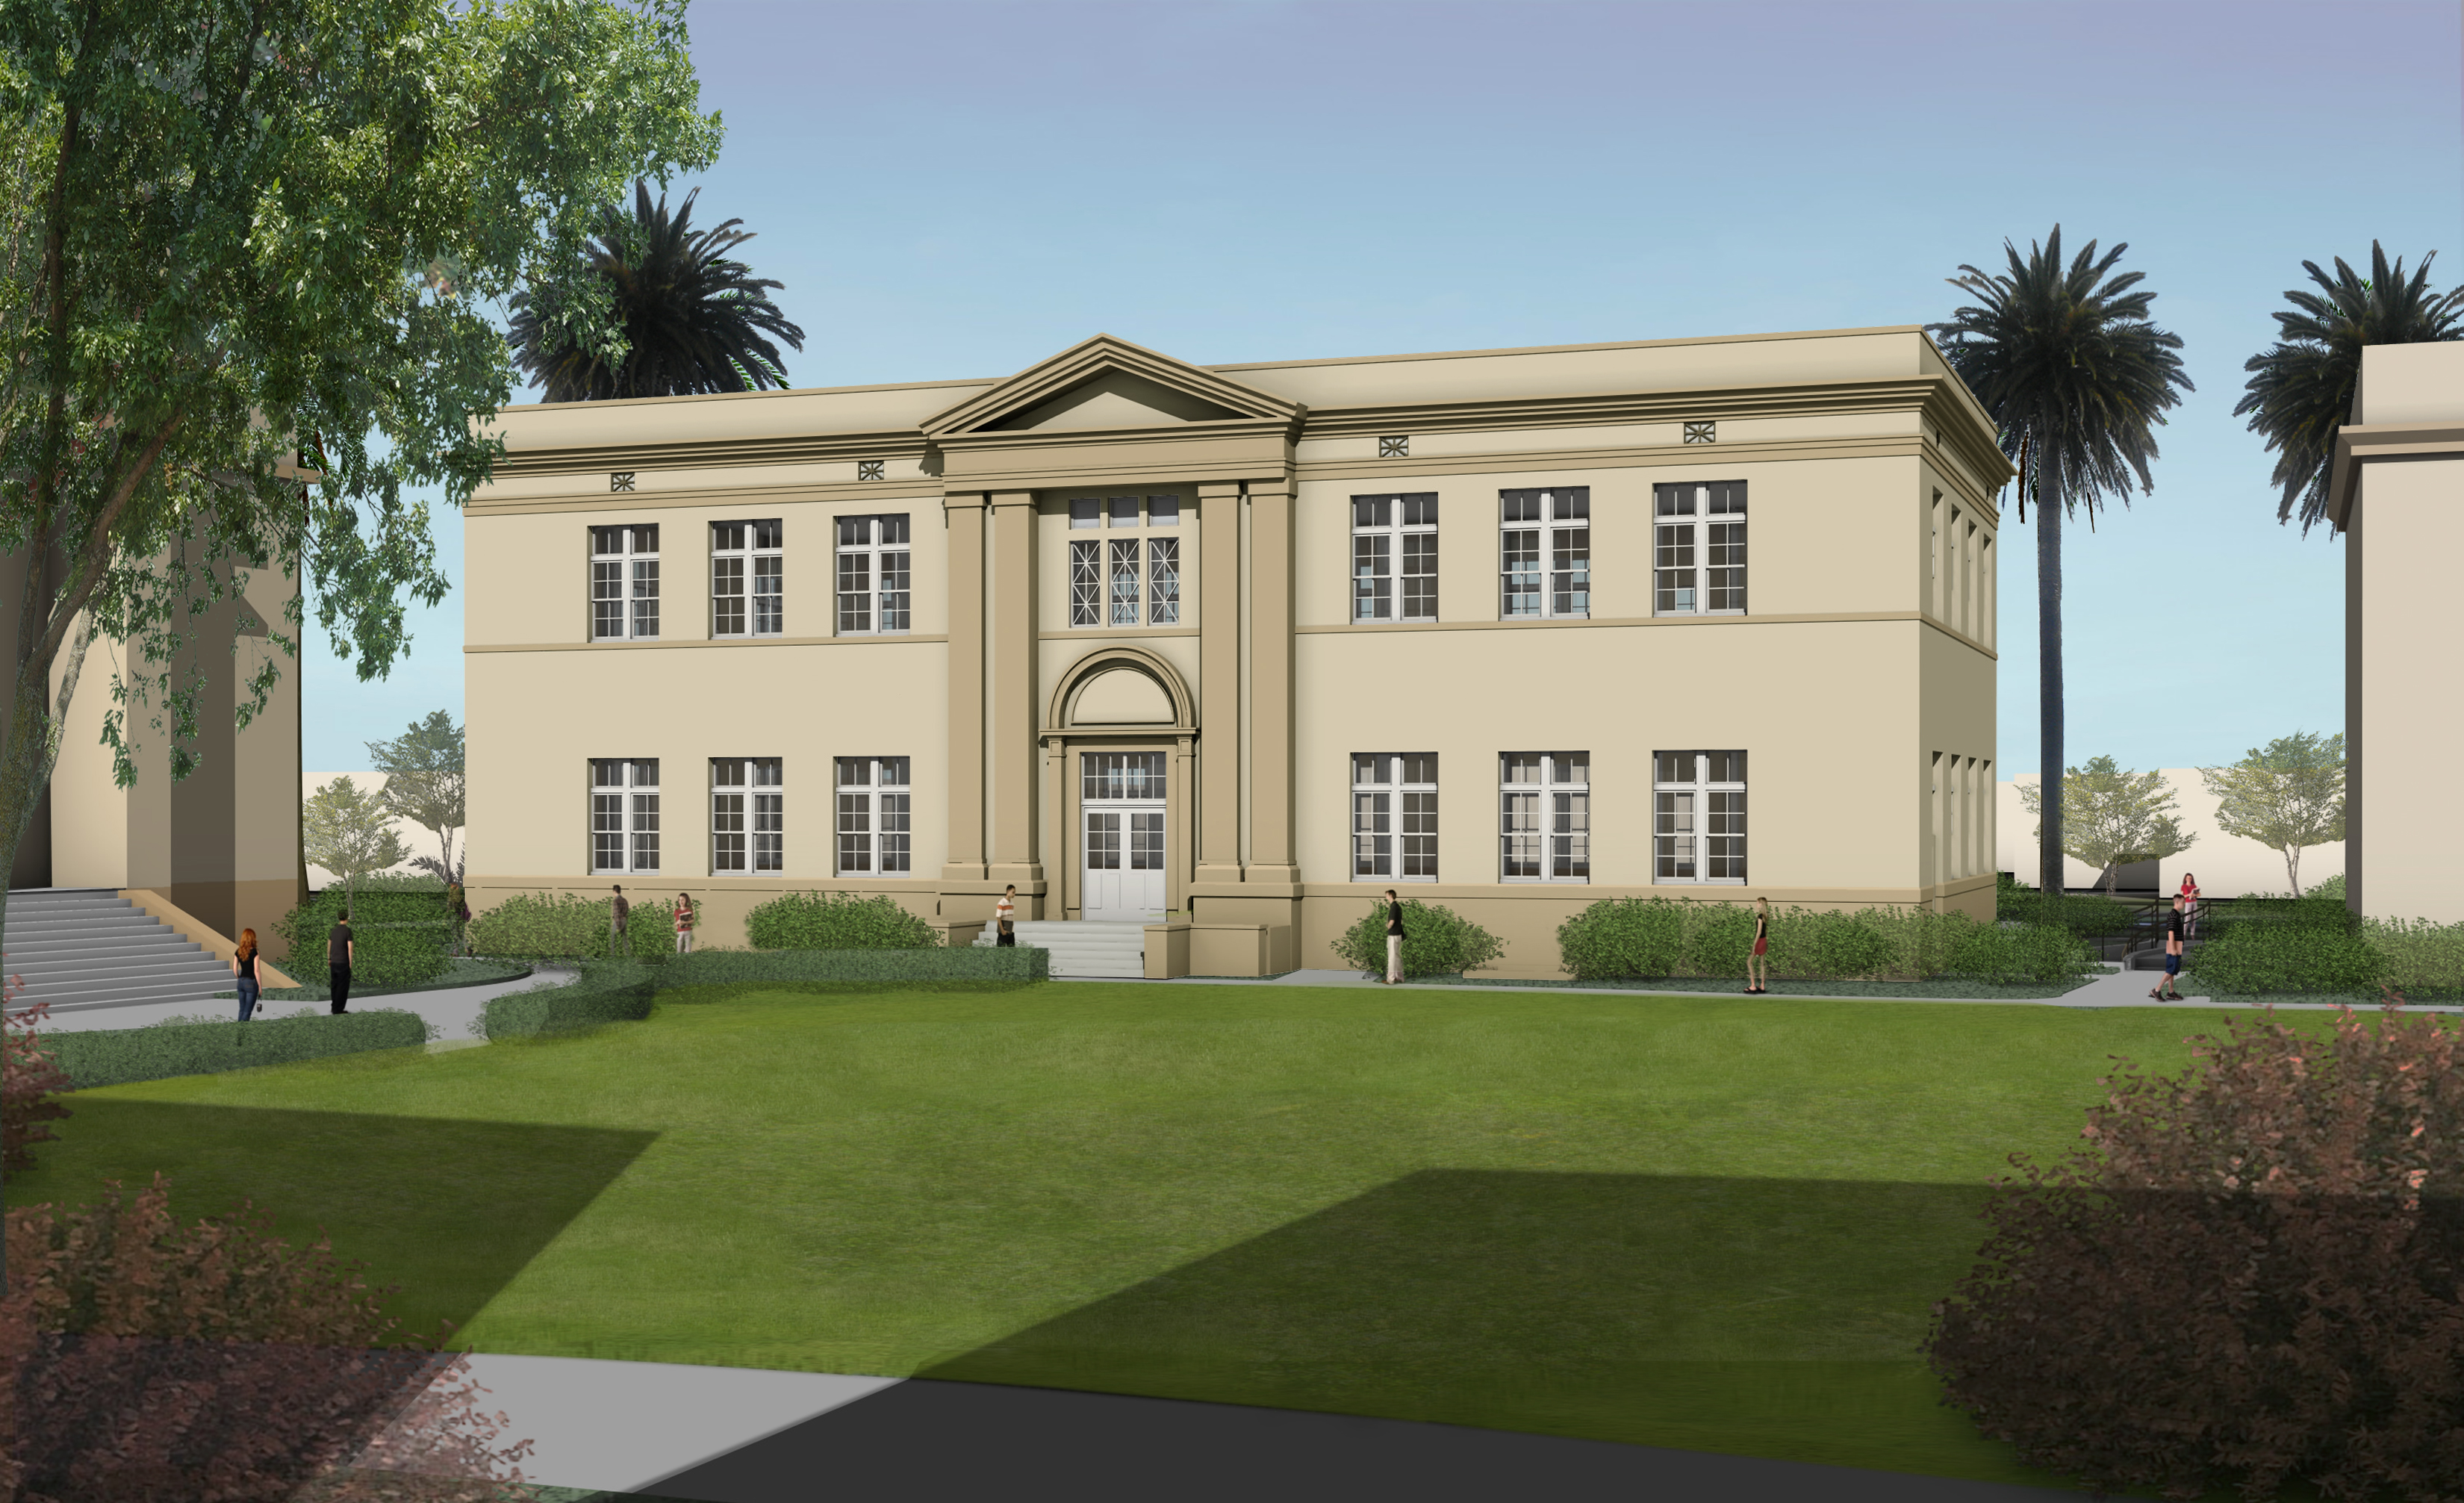 The new classroom building in the historic classroom core will be named James L. and Lynne P. Doti Hall.